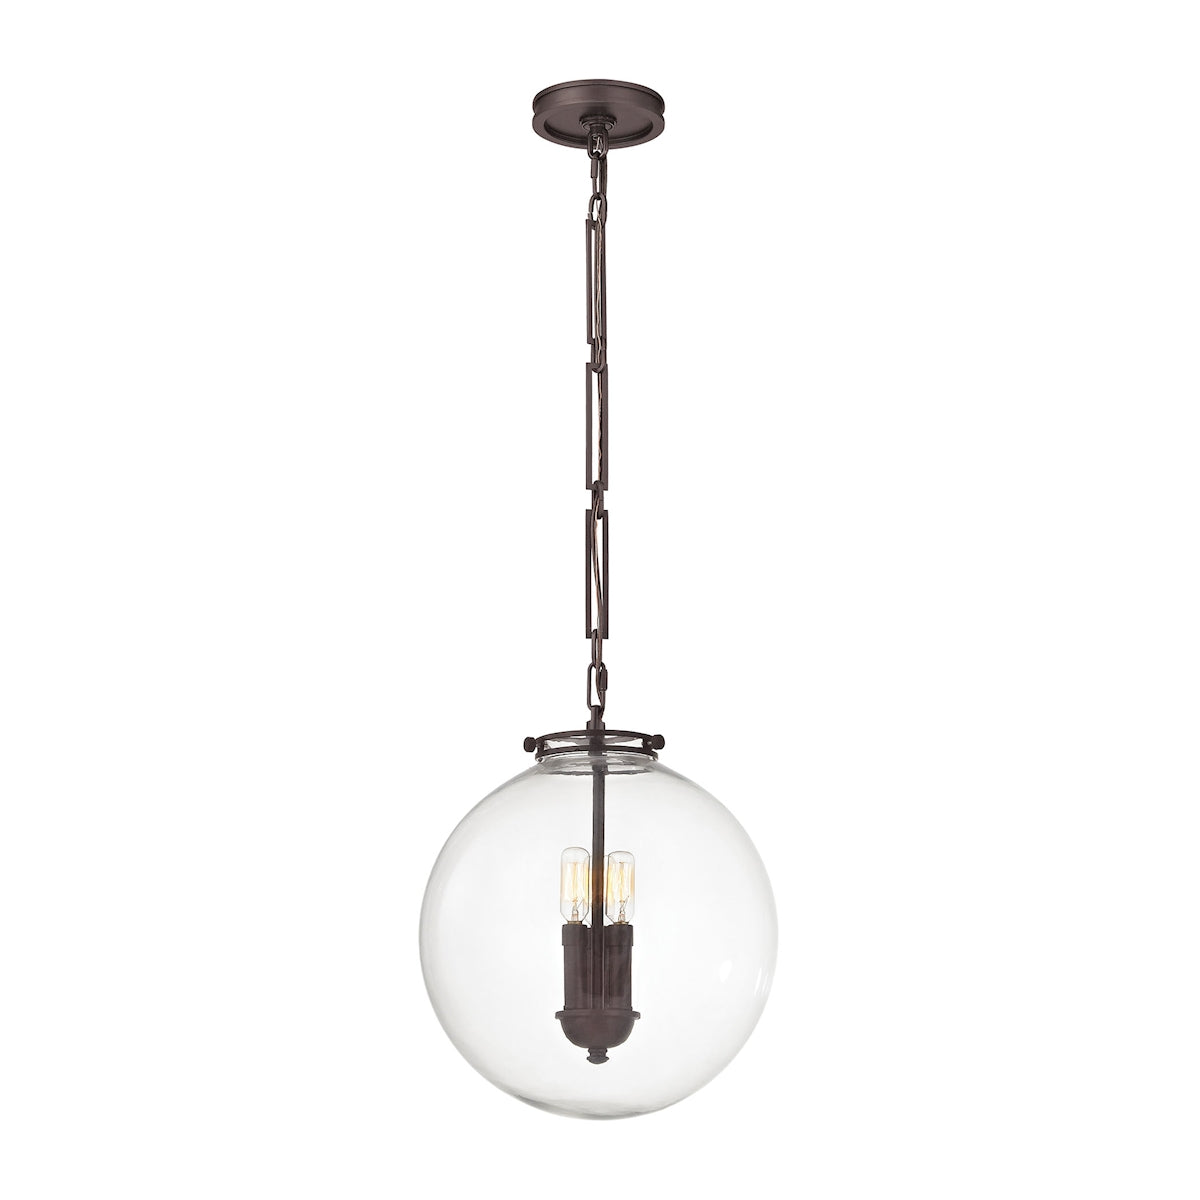 ELK Lighting 16372/3 Gramercy 3-Light Pendant in Oil Rubbed Bronze with Clear Glass